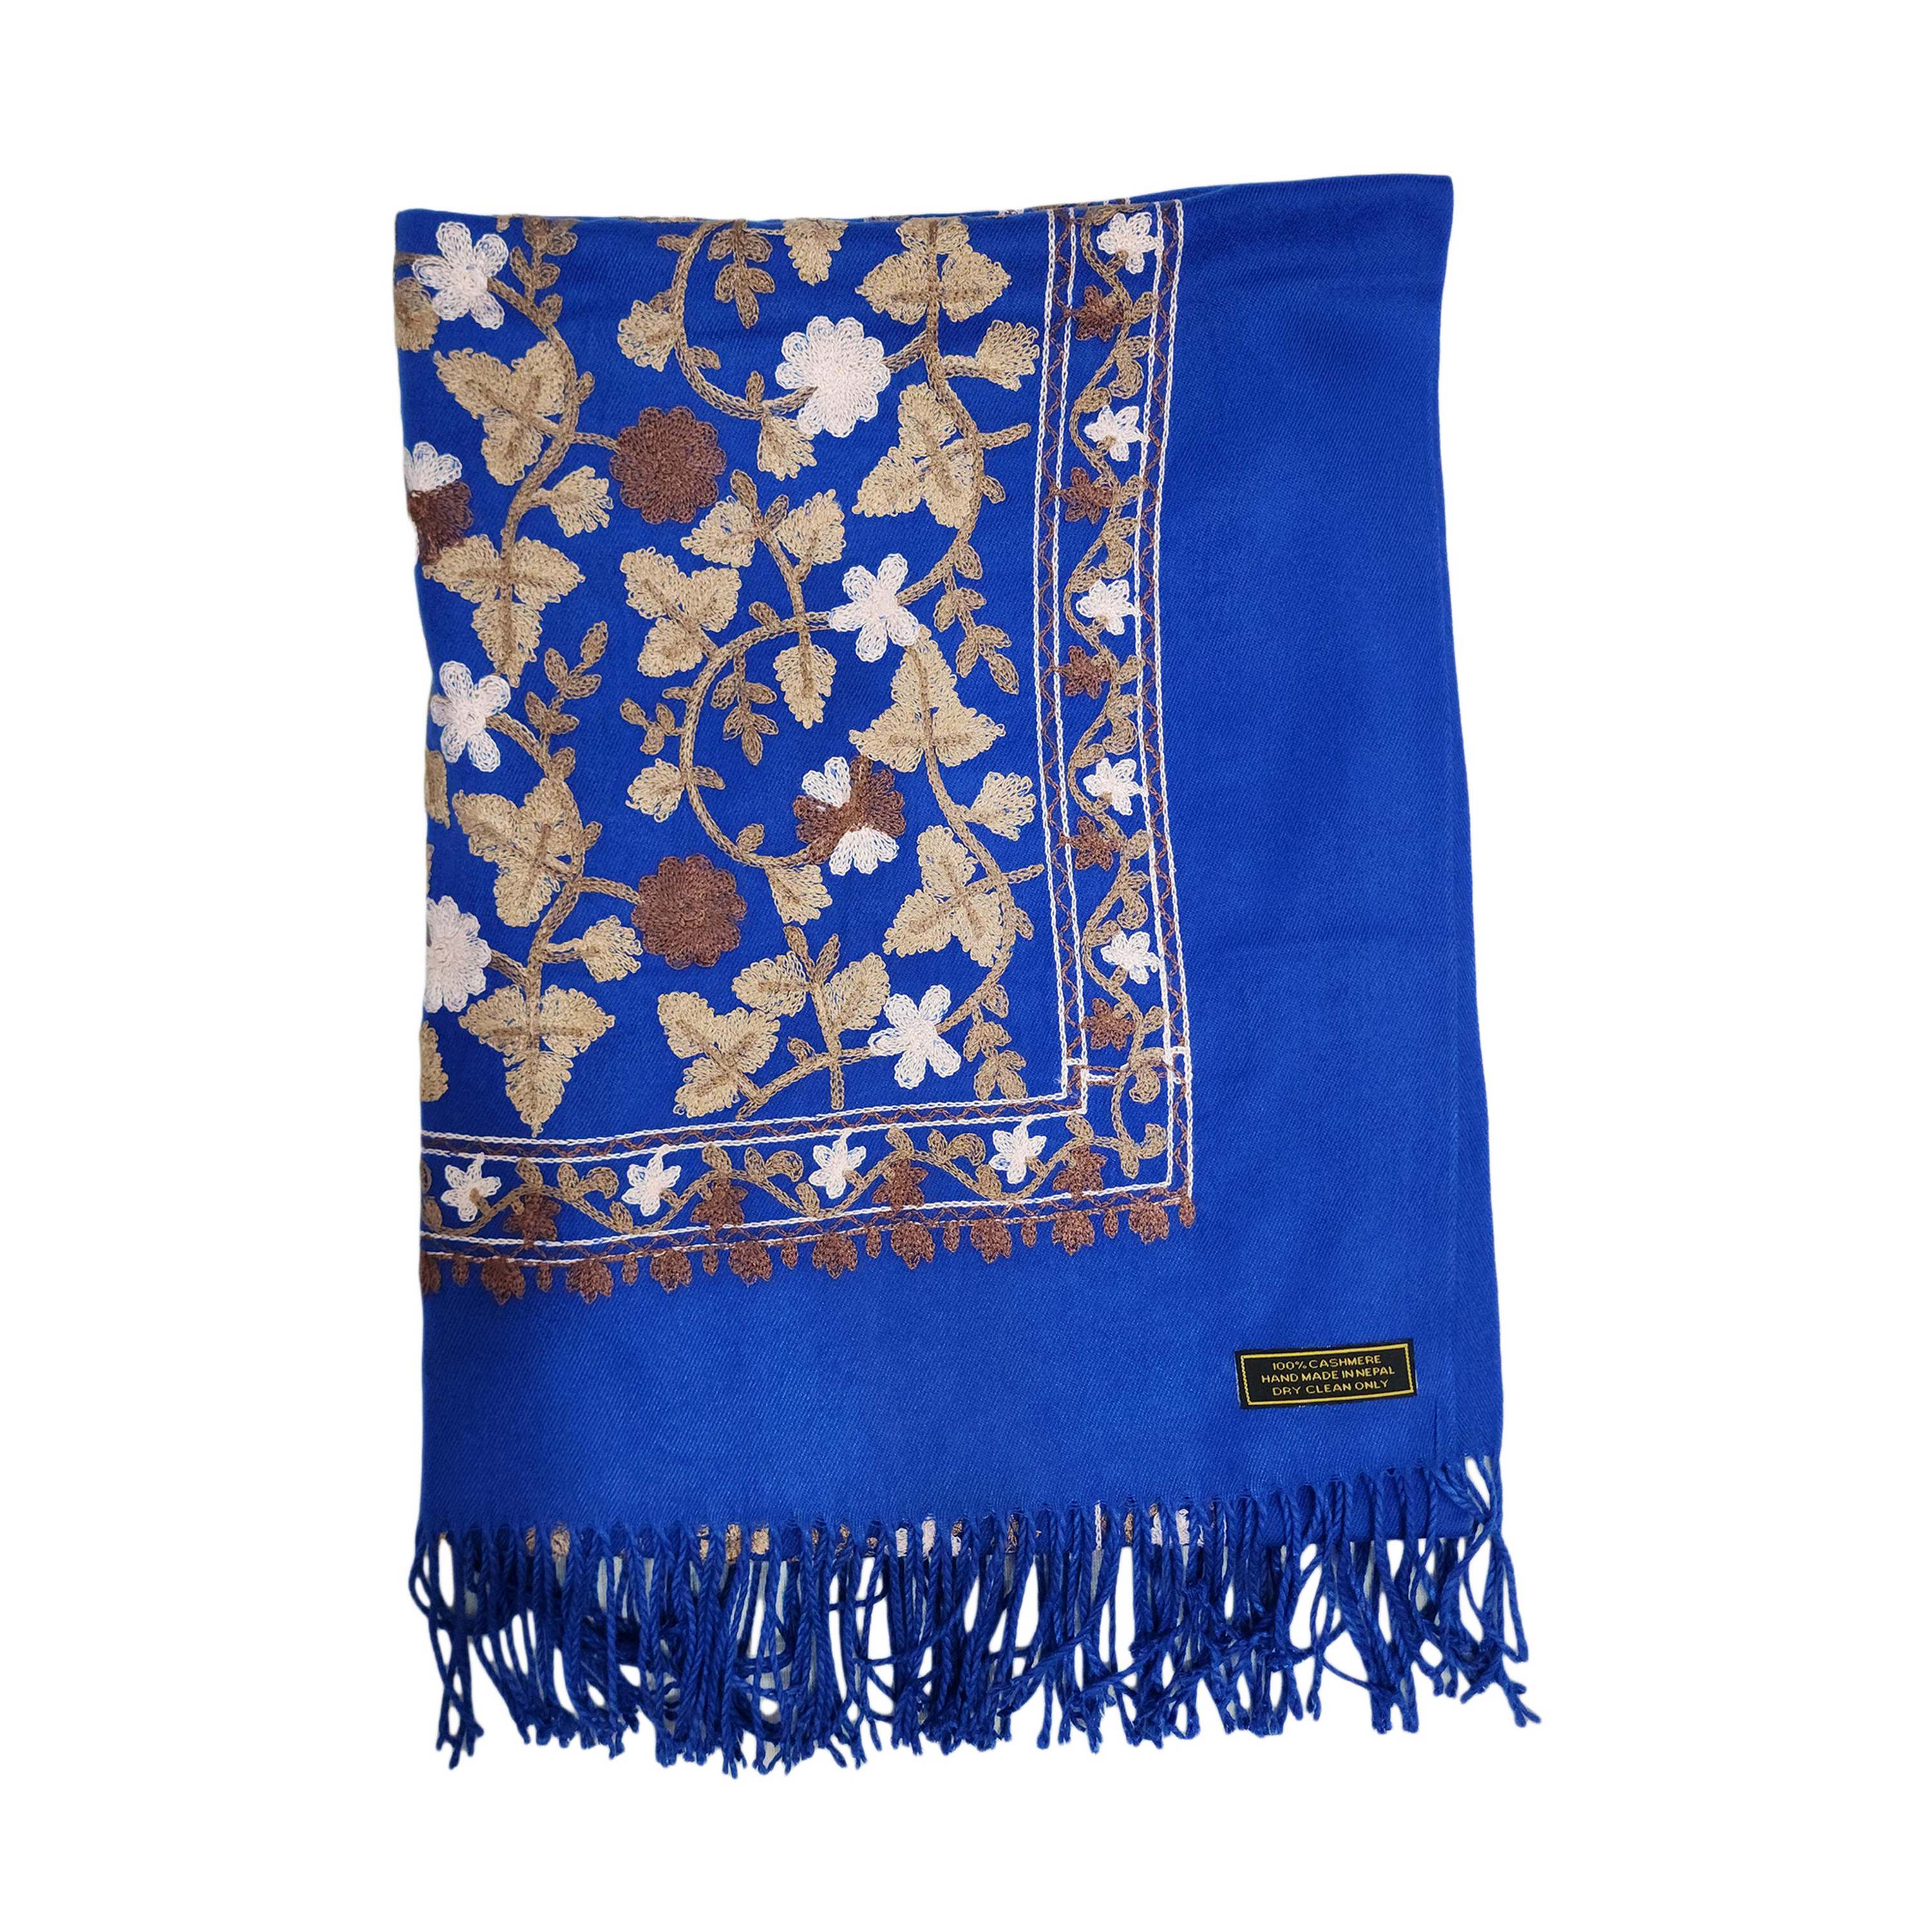 Desigener Shawl, Thick Nepali Shawl, With Heavy Embroidery, Color blue